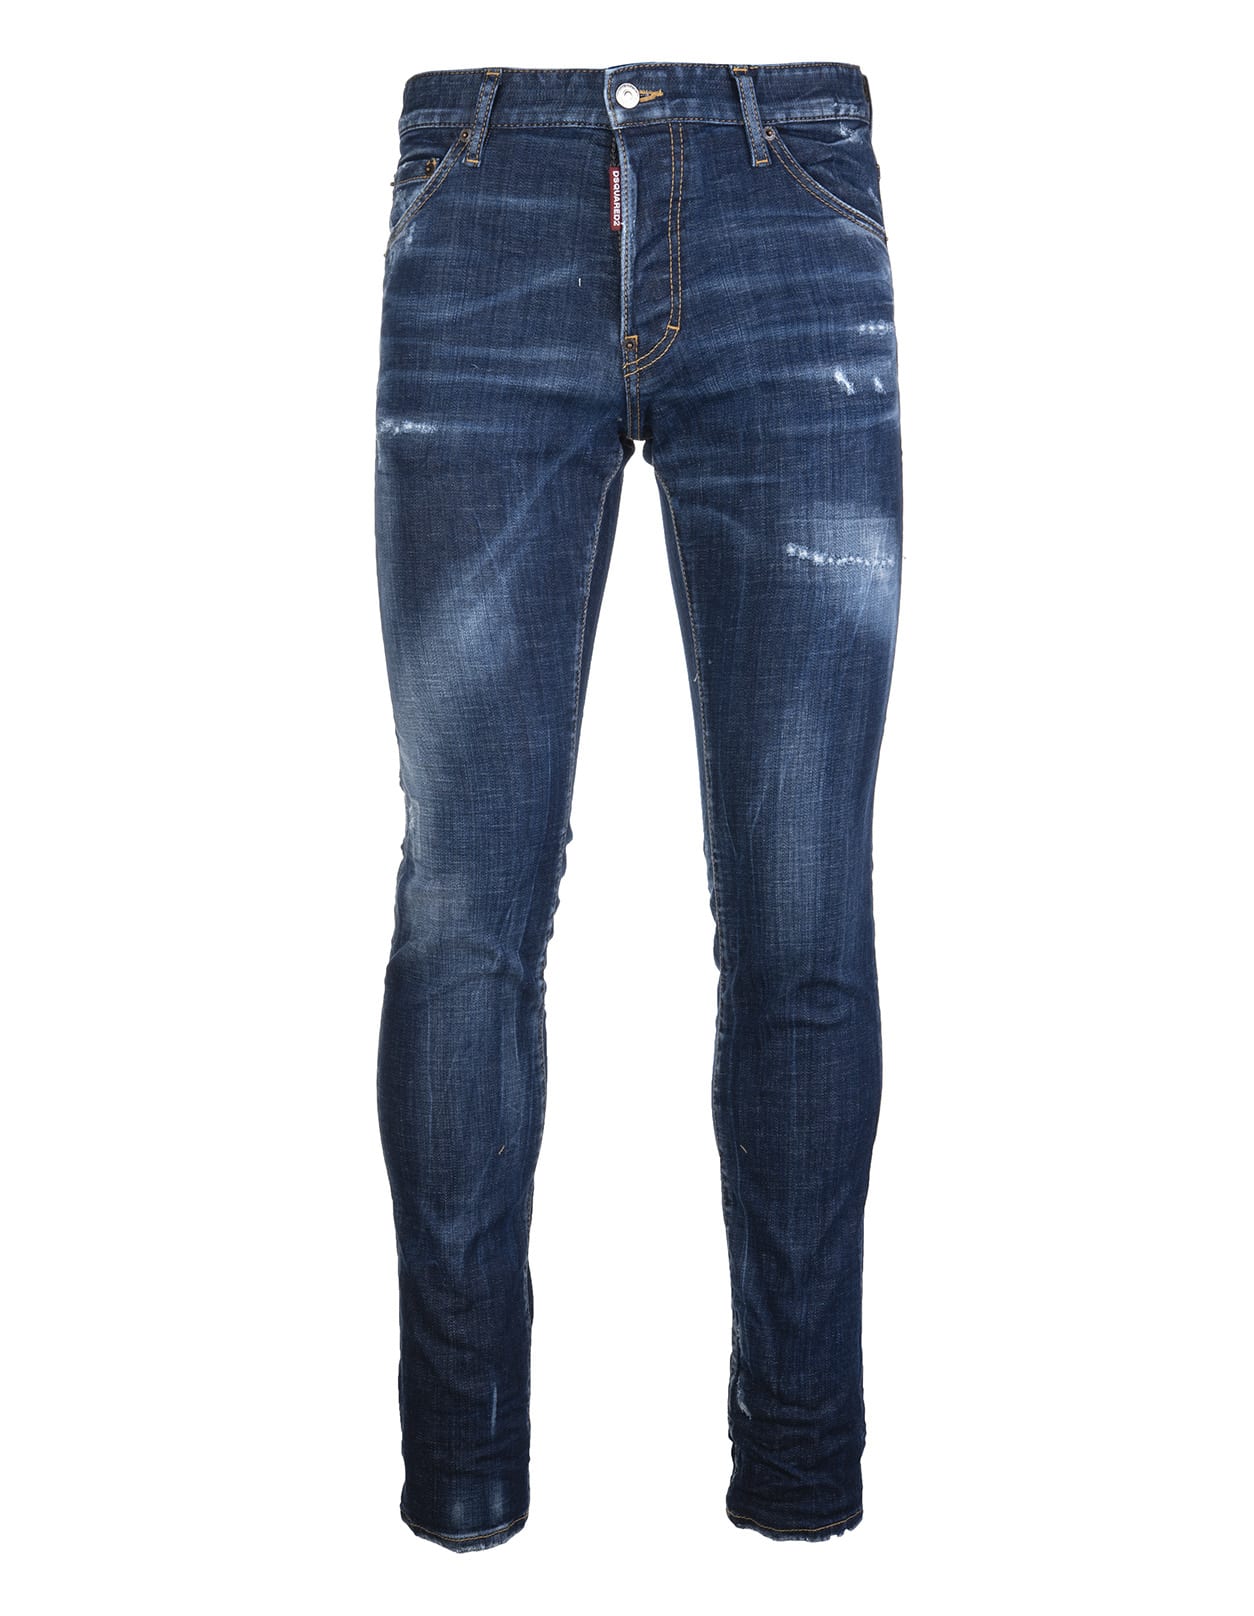 Dsquared2 Man Cool Guy Sexiest Fit Dark Wash Jeans